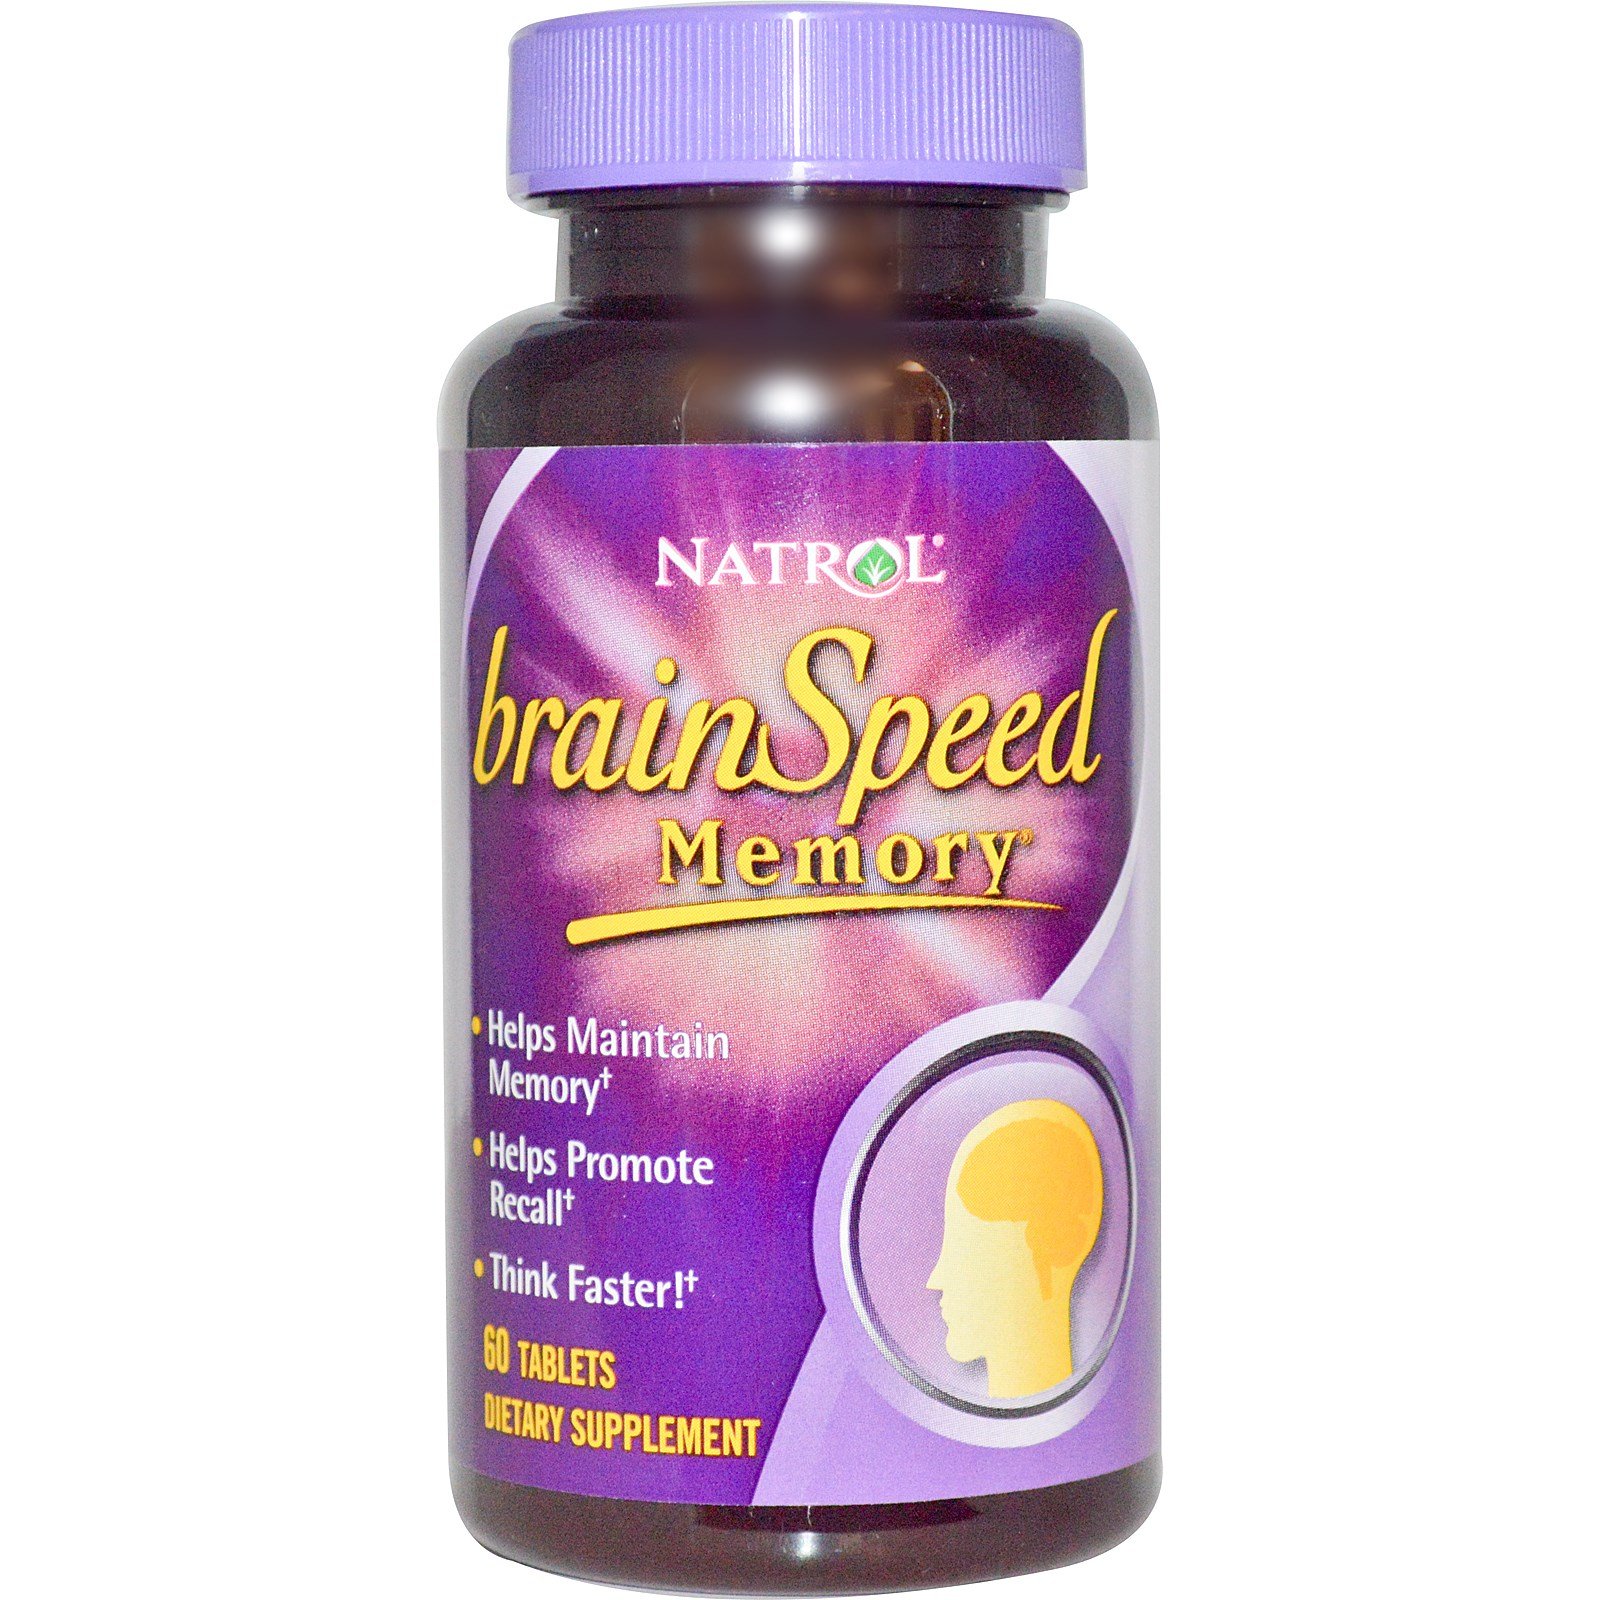 BrainSpeed Memory, 60 pcs, Natrol. Special supplements. 